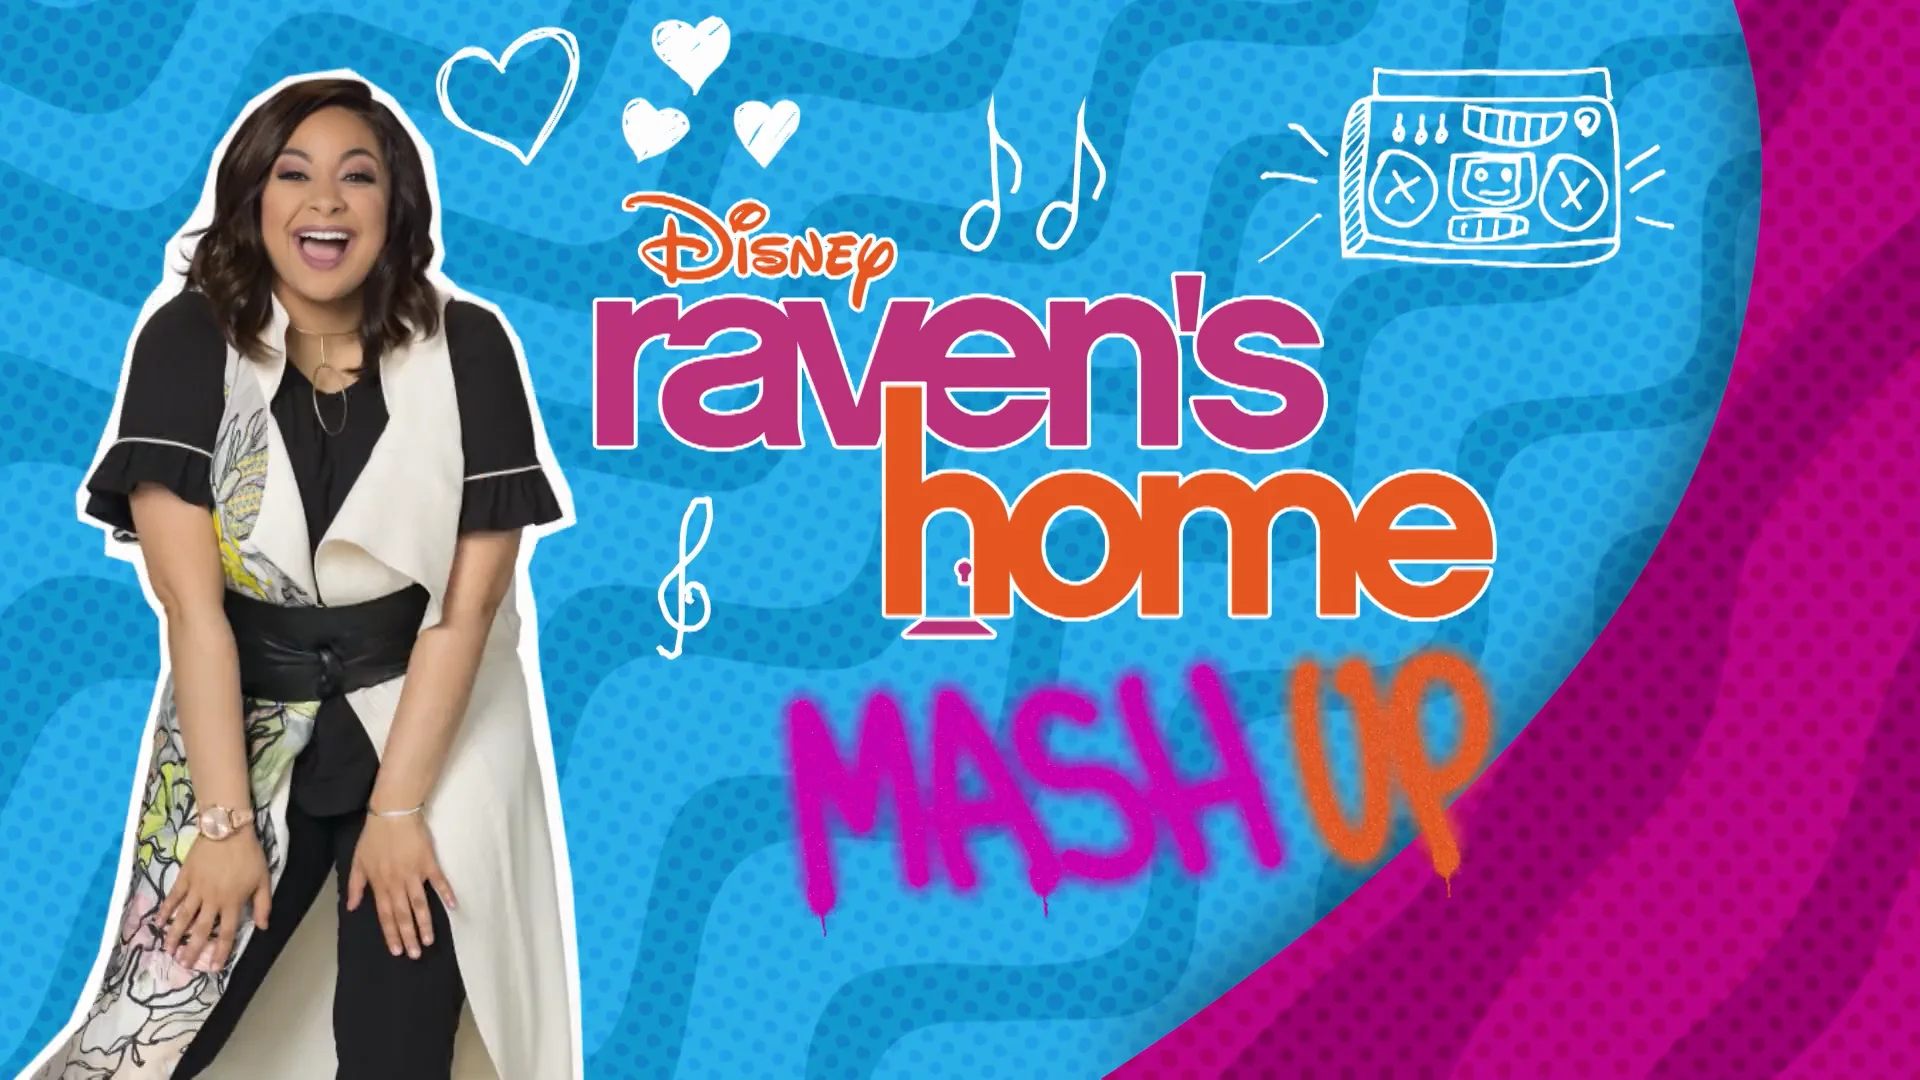 Home - Disney Channel